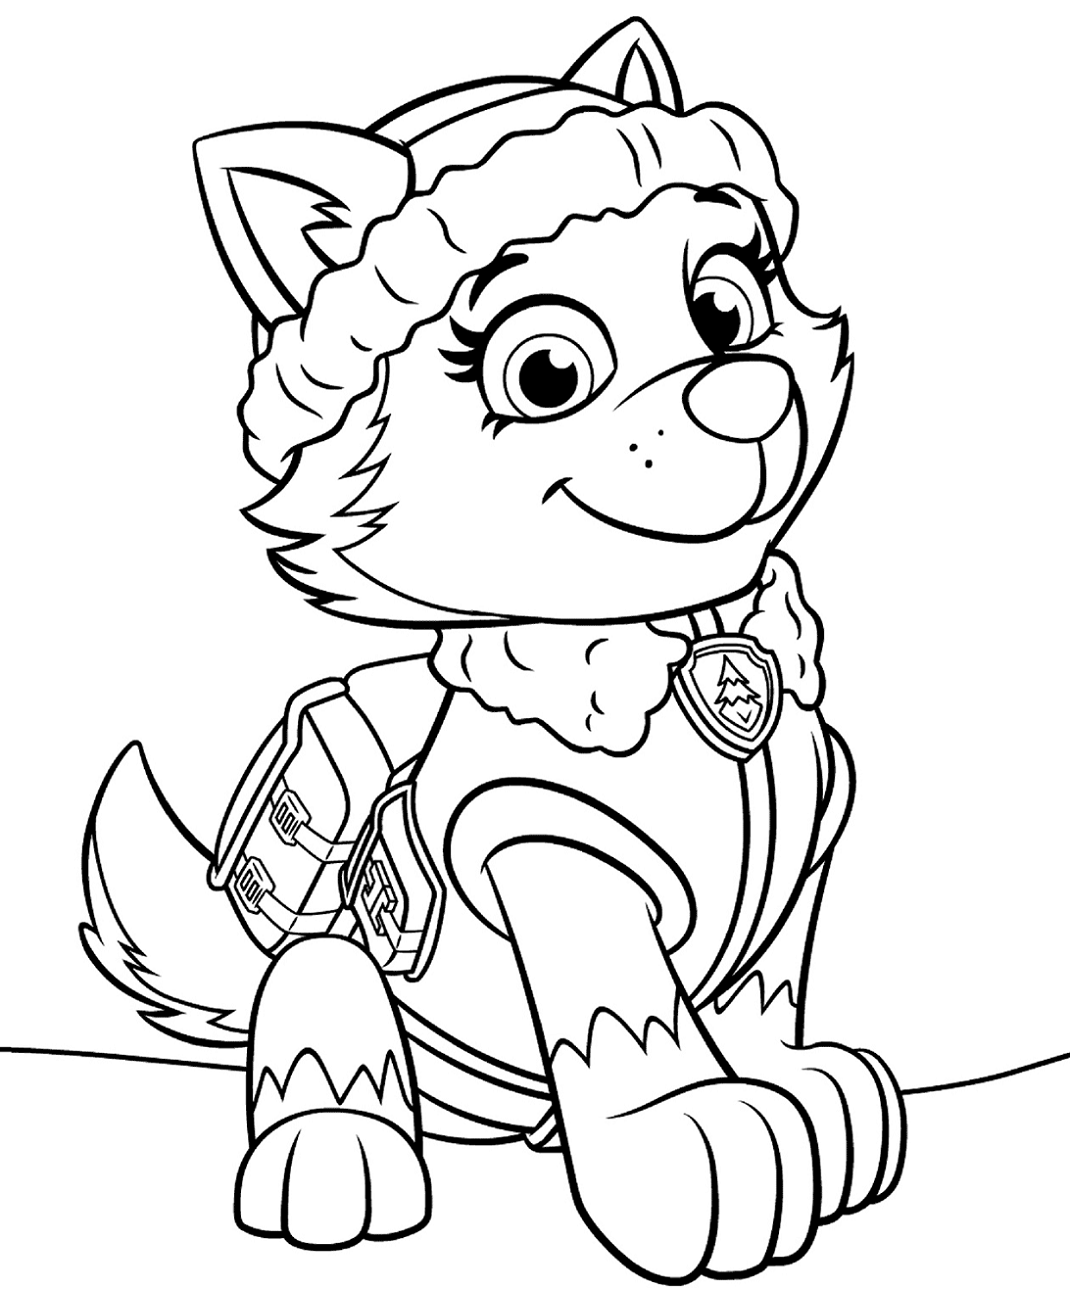 PAW Patrol Everest Coloring Page - Free Printable Coloring Pages for Kids